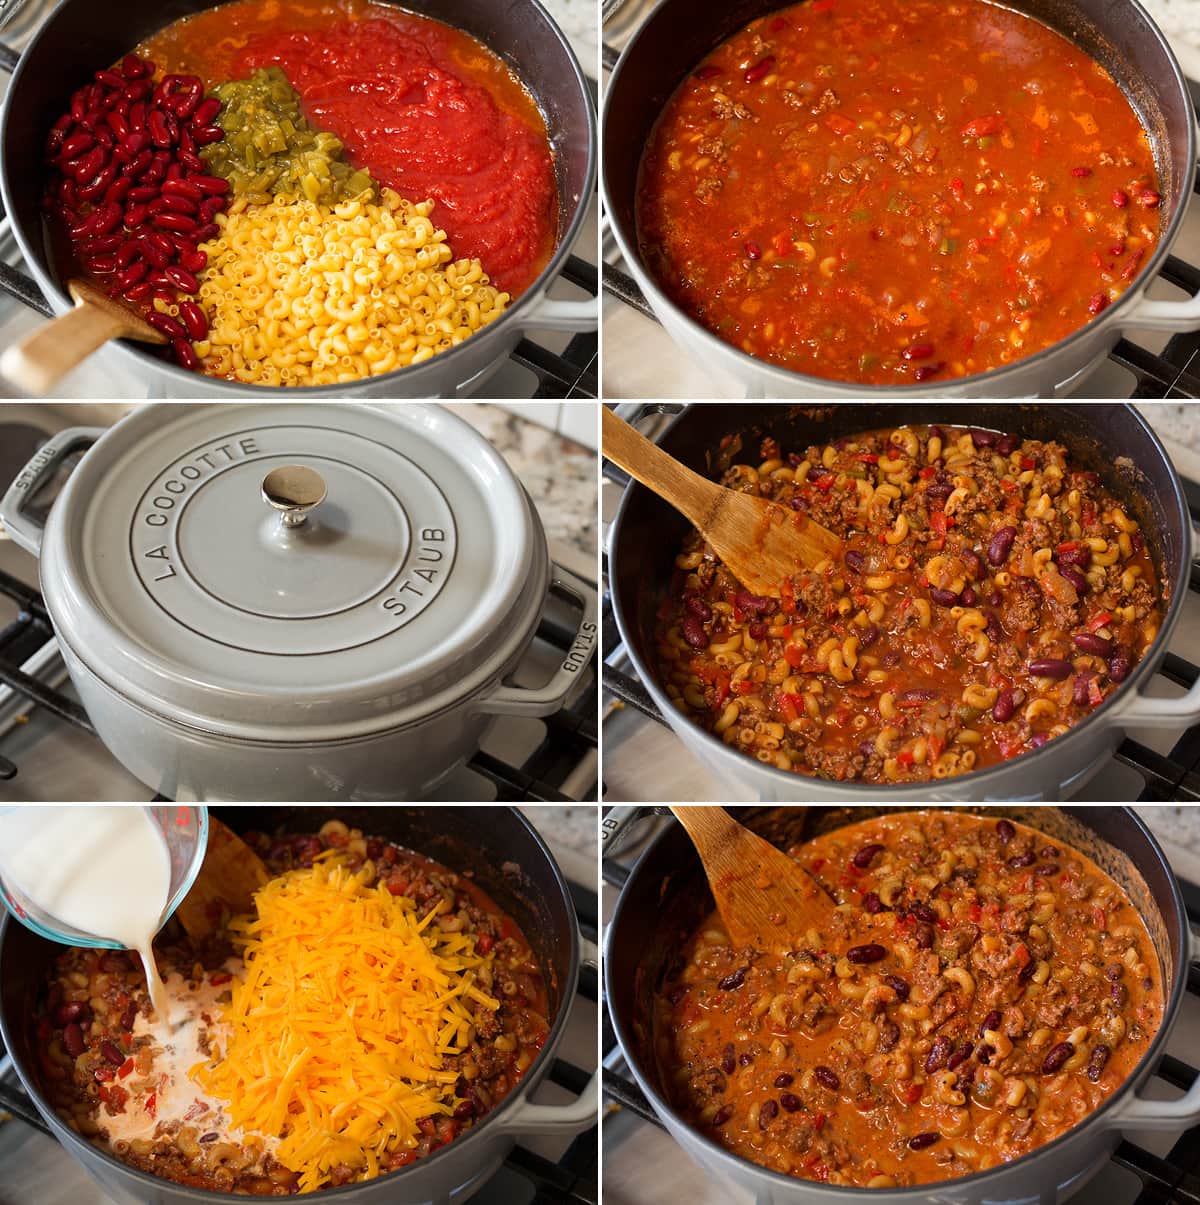 Continued steps showing how to simmer chili mac ingredients in pot.